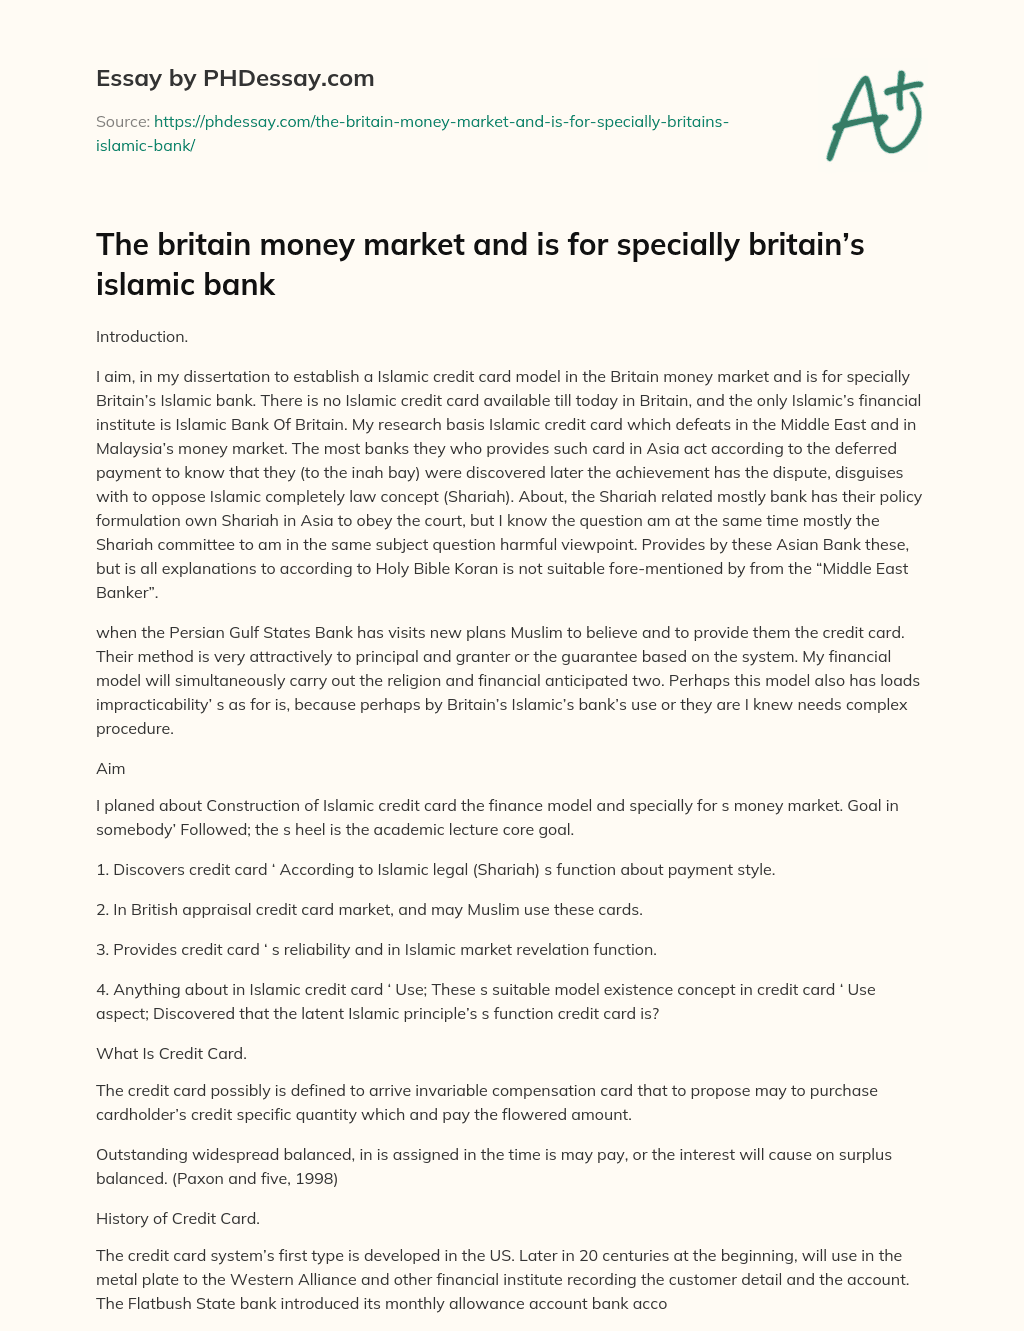 The britain money market and is for specially britain’s islamic bank essay